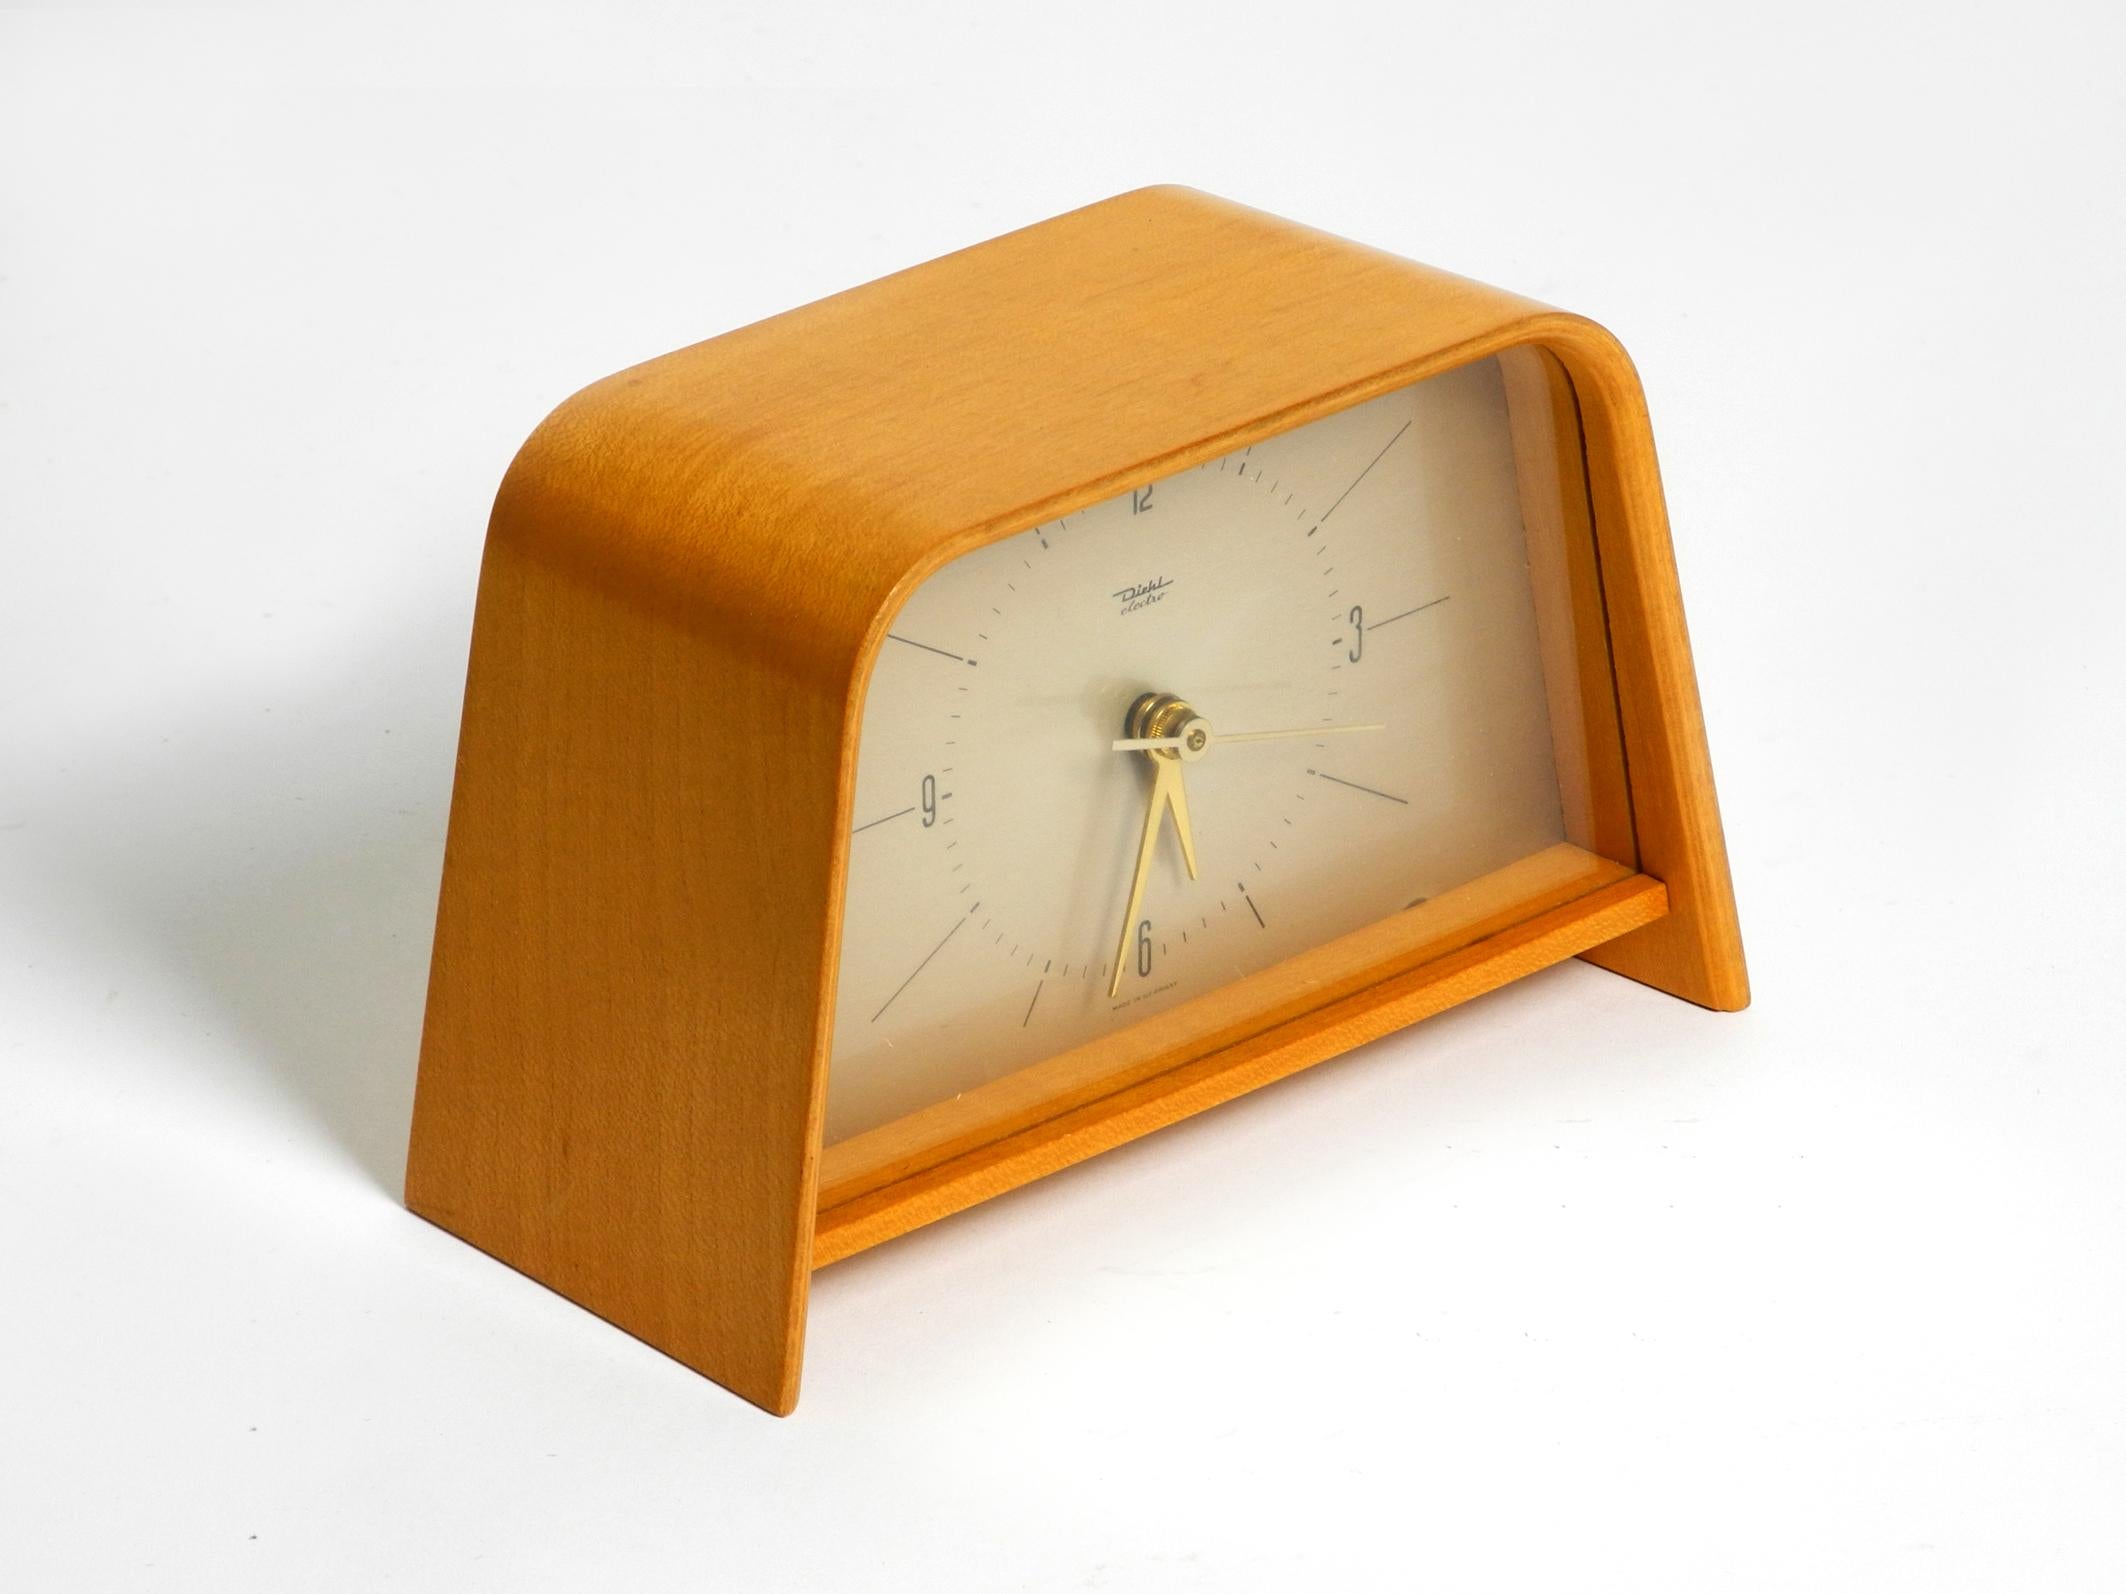 Beautiful original 1950s Diehl Electro table clock with curved teak plywood 3